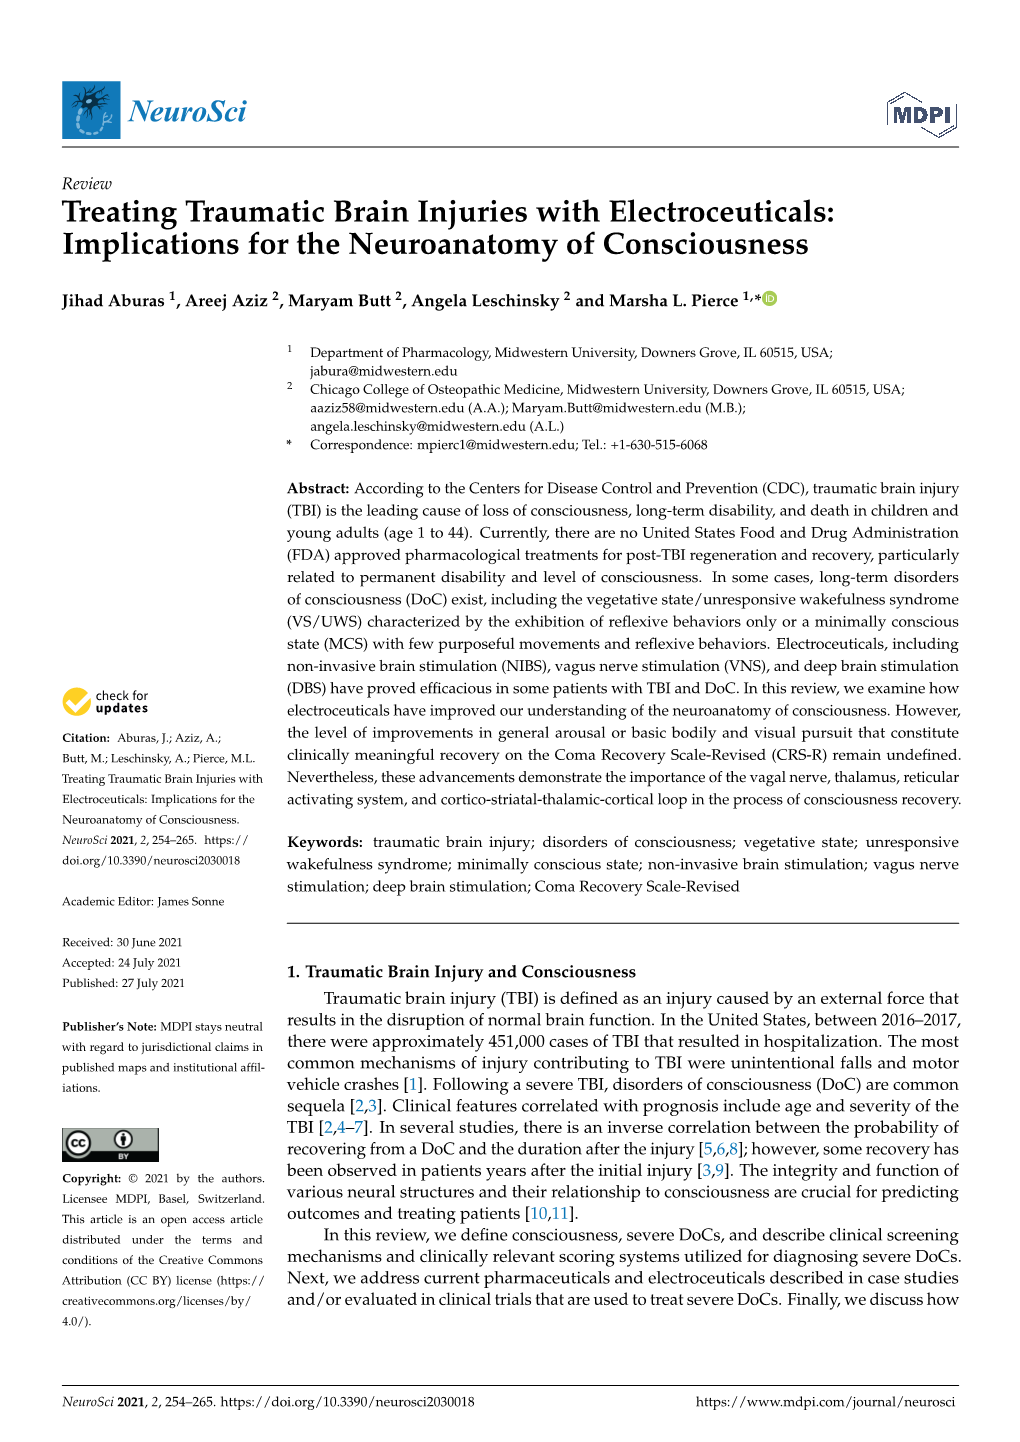 Treating Traumatic Brain Injuries with Electroceuticals: Implications for the Neuroanatomy of Consciousness